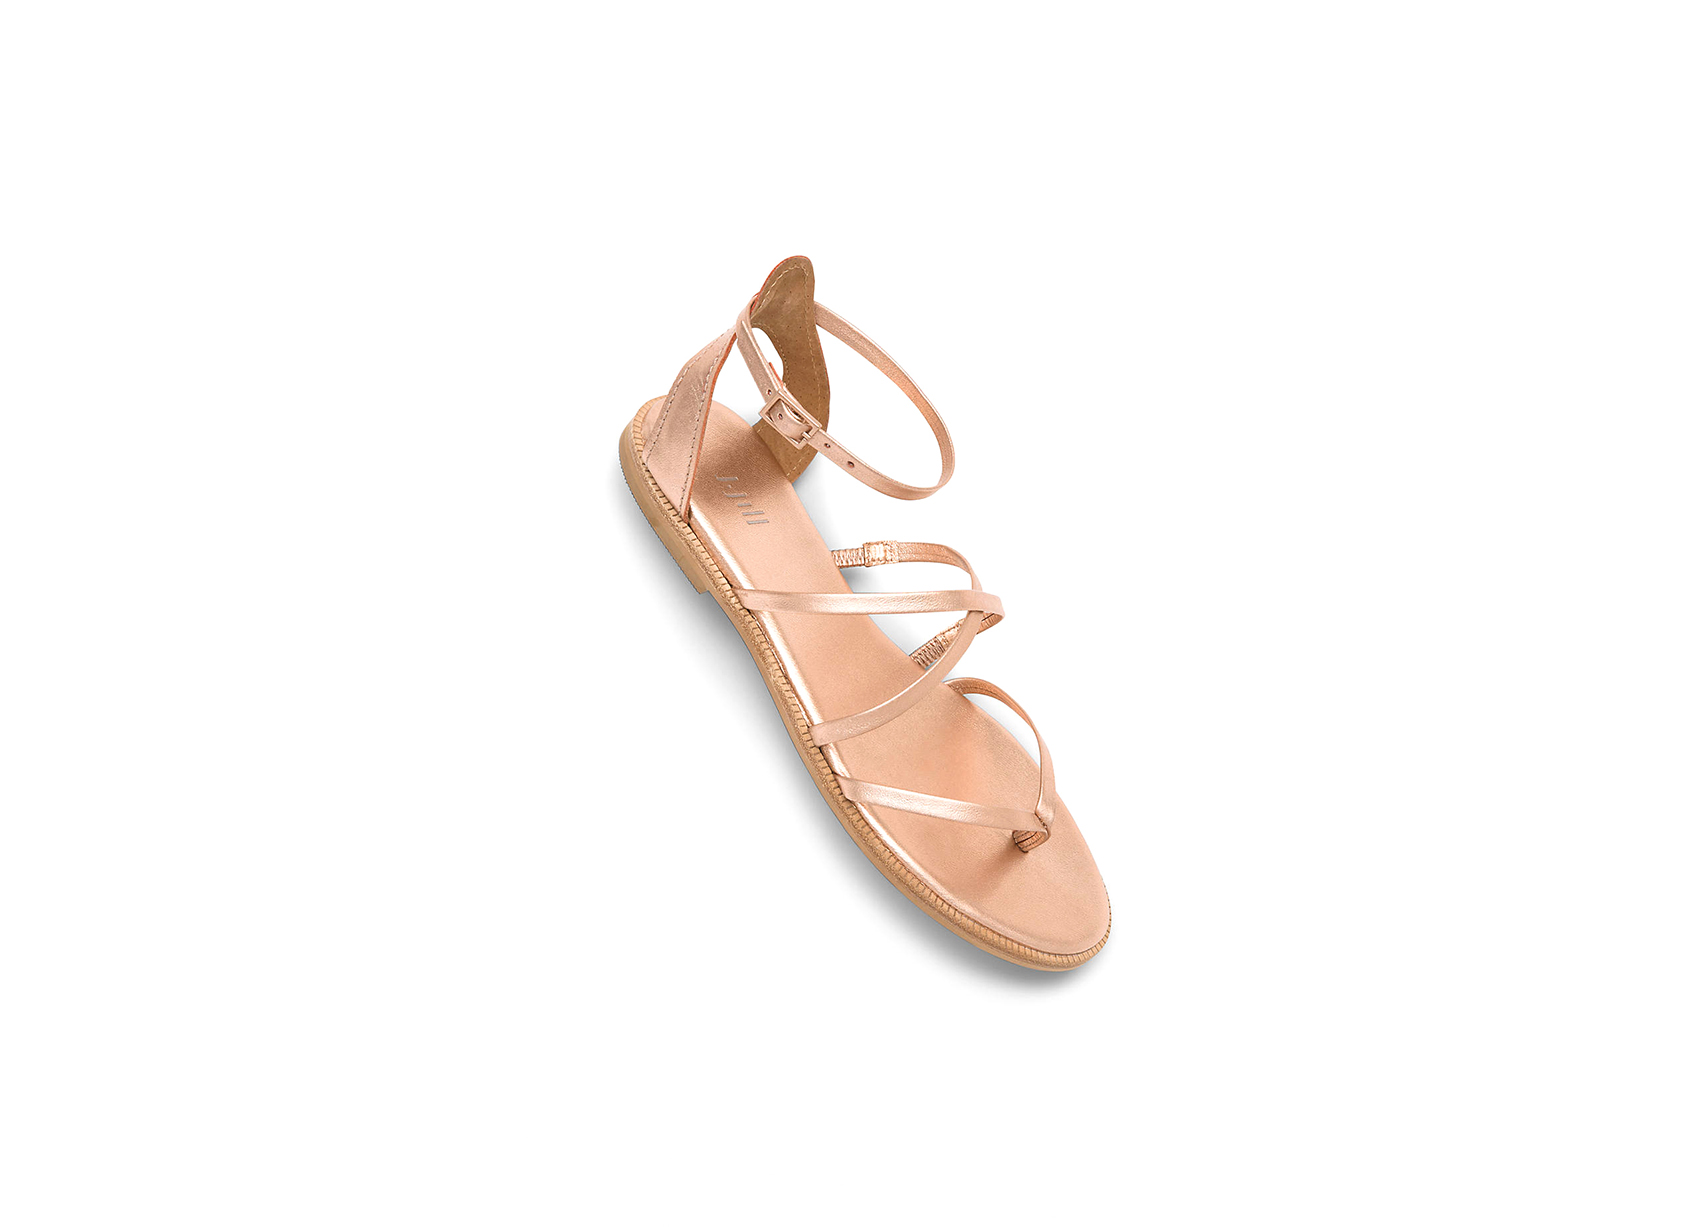 Sandals Strappy J.Jill Rose Gold